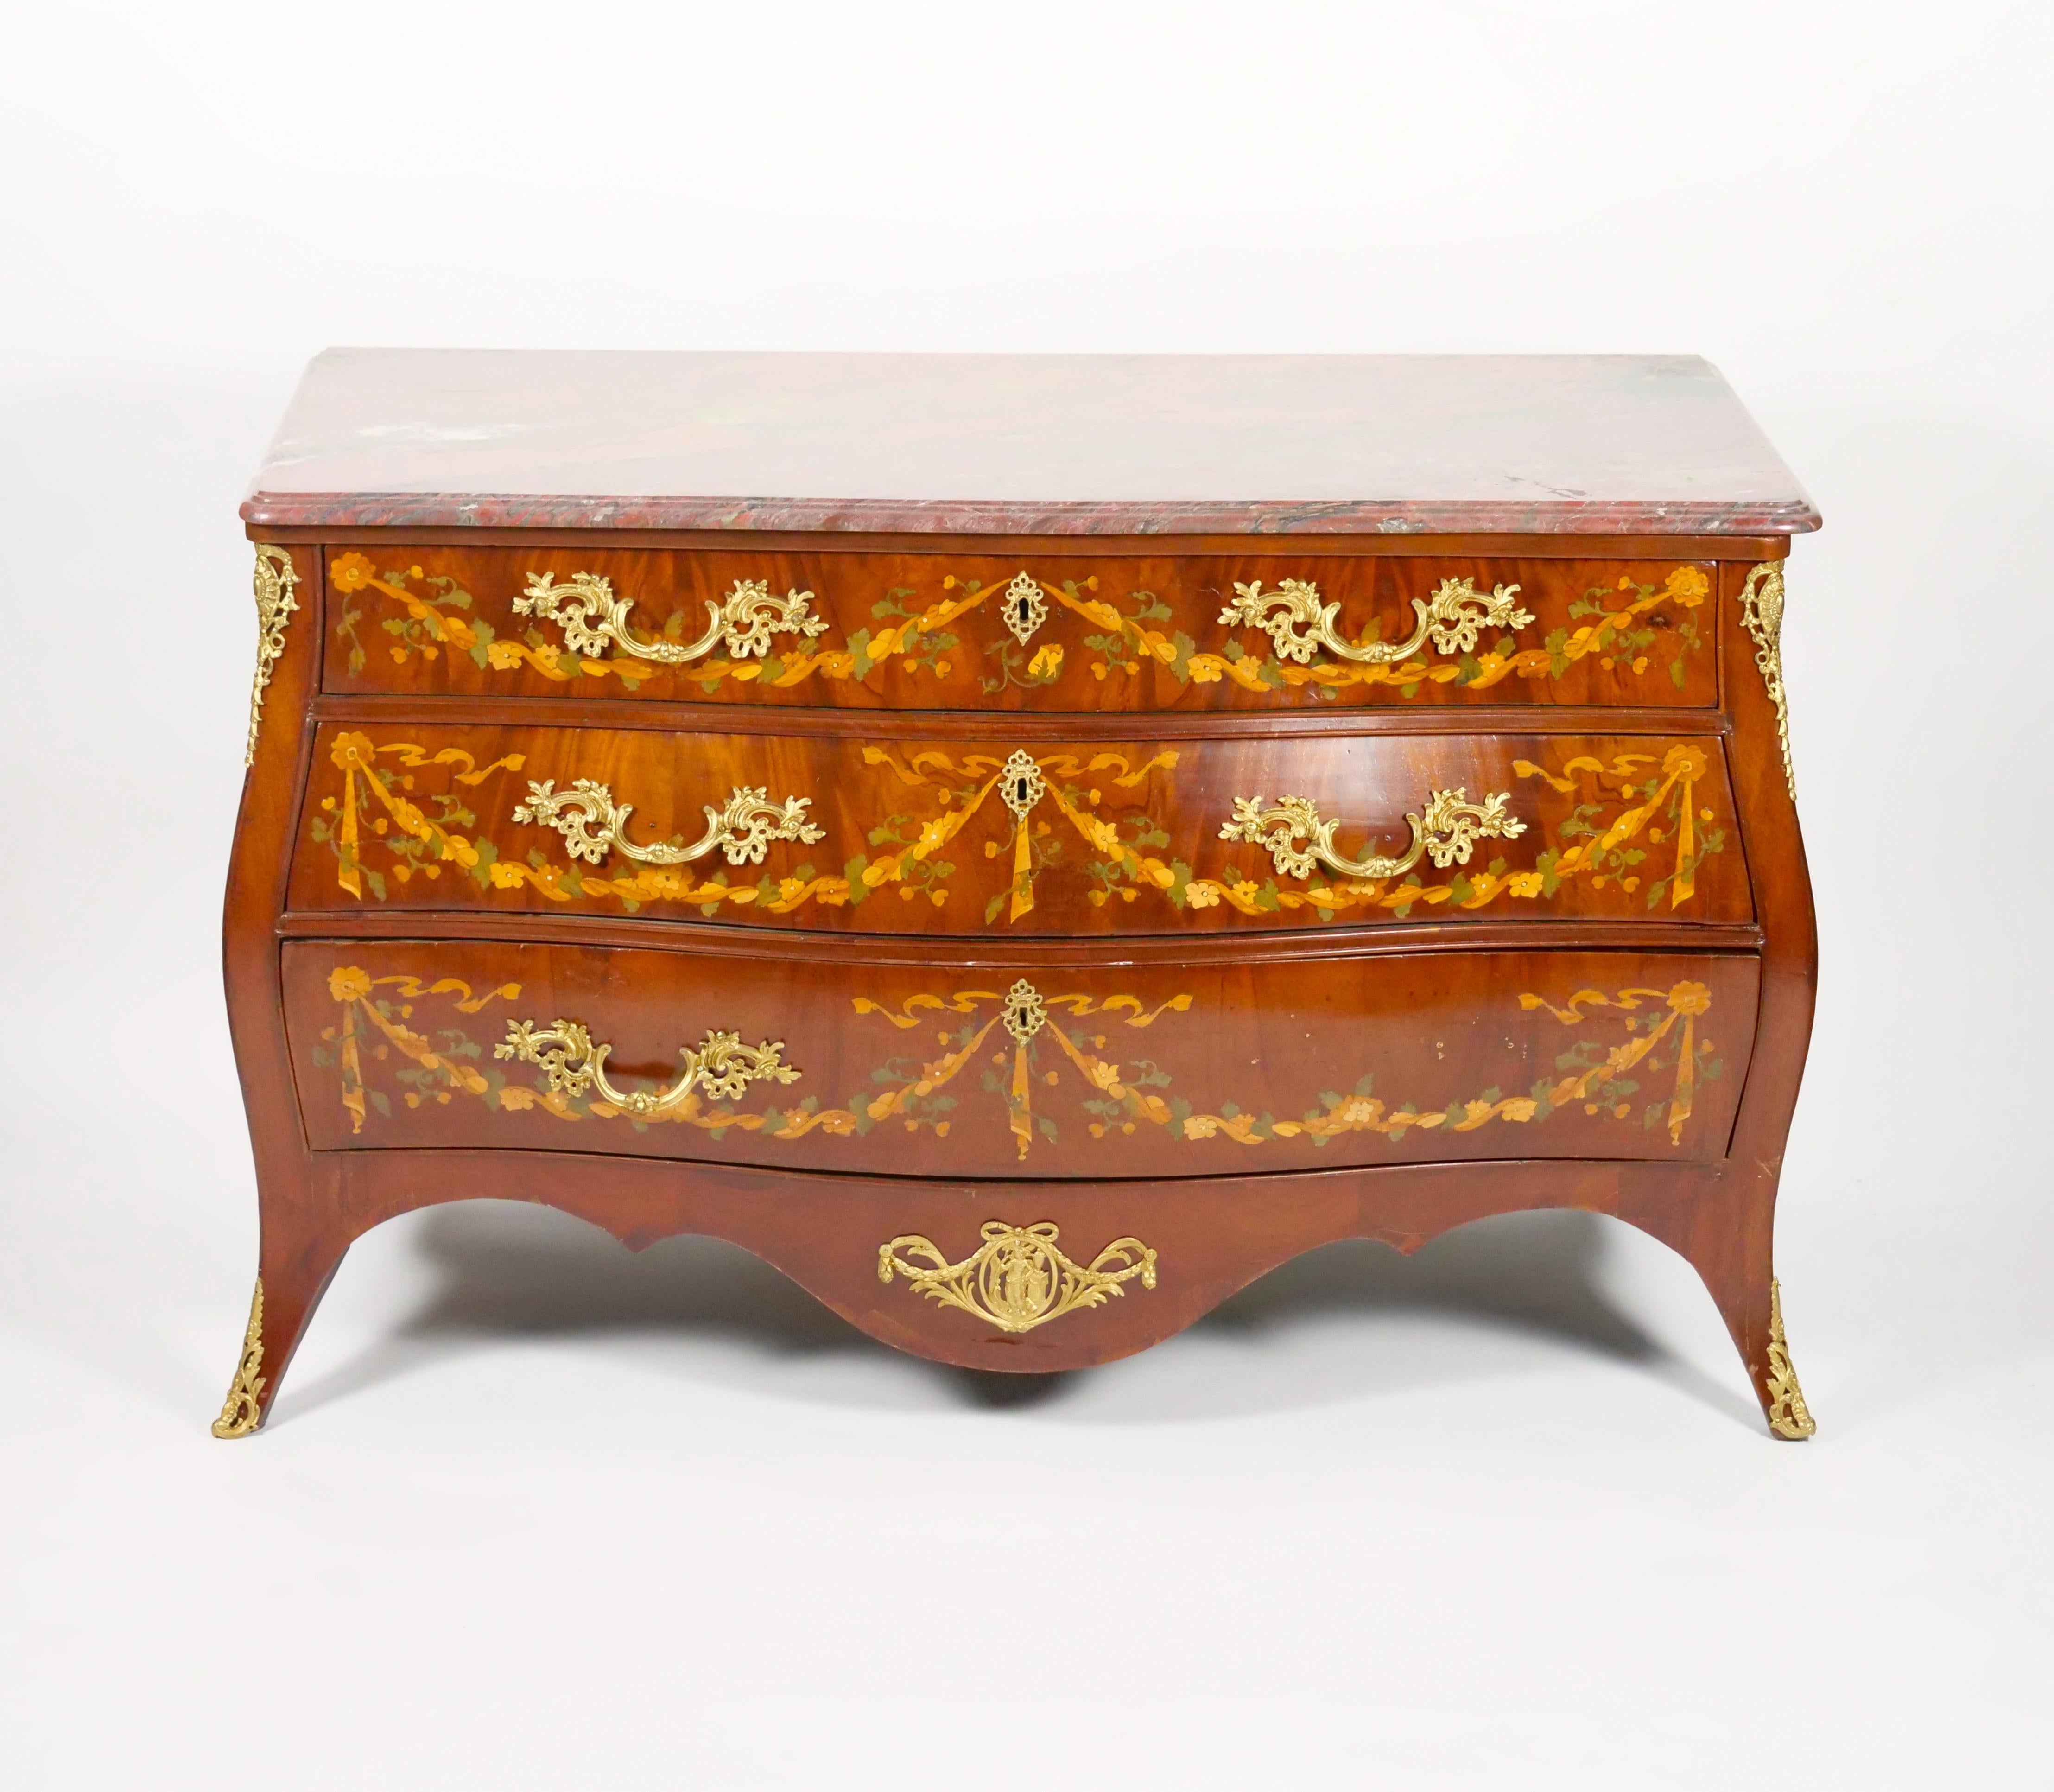 Enrich your living space with this Early 19th Century Commode / Credenza, an exquisite piece designed in the French Louis XV style. This commode is not just a functional storage unit; it is a work of art, meticulously crafted with exceptional